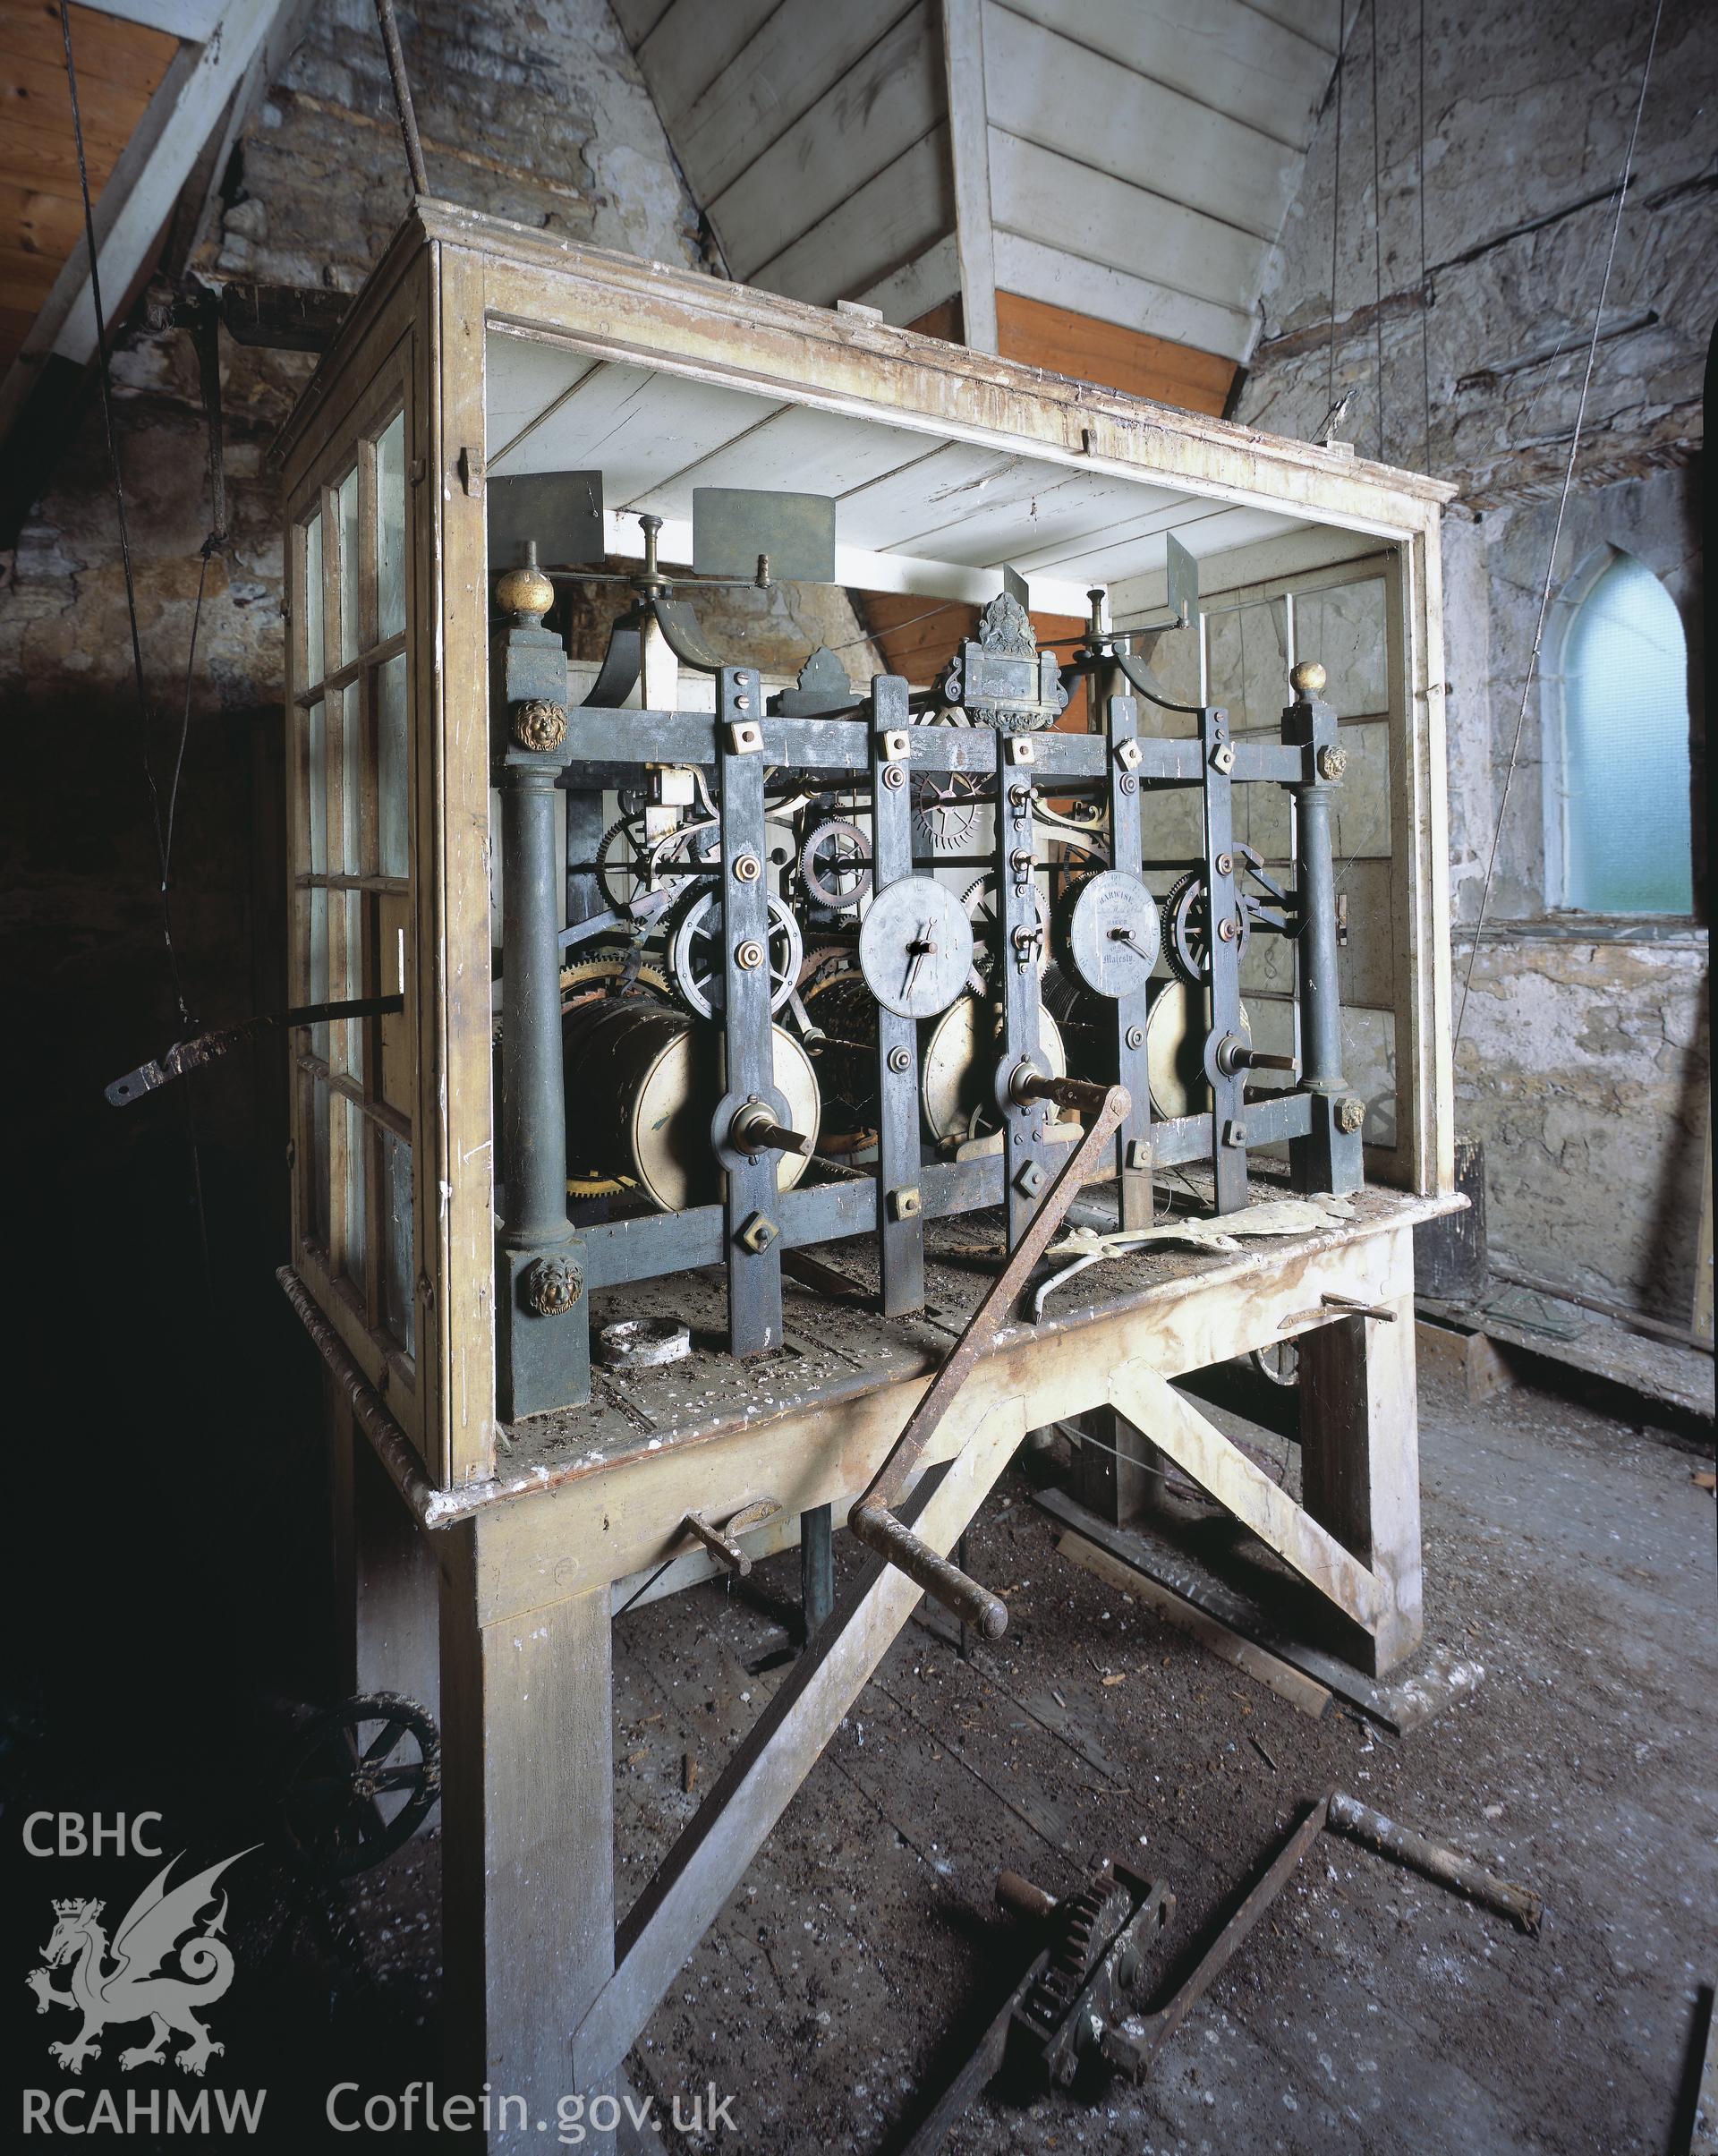 RCAHMW colour transparency showing view of the clock mechanism in the tower at Golden Grove, Llandeilo.